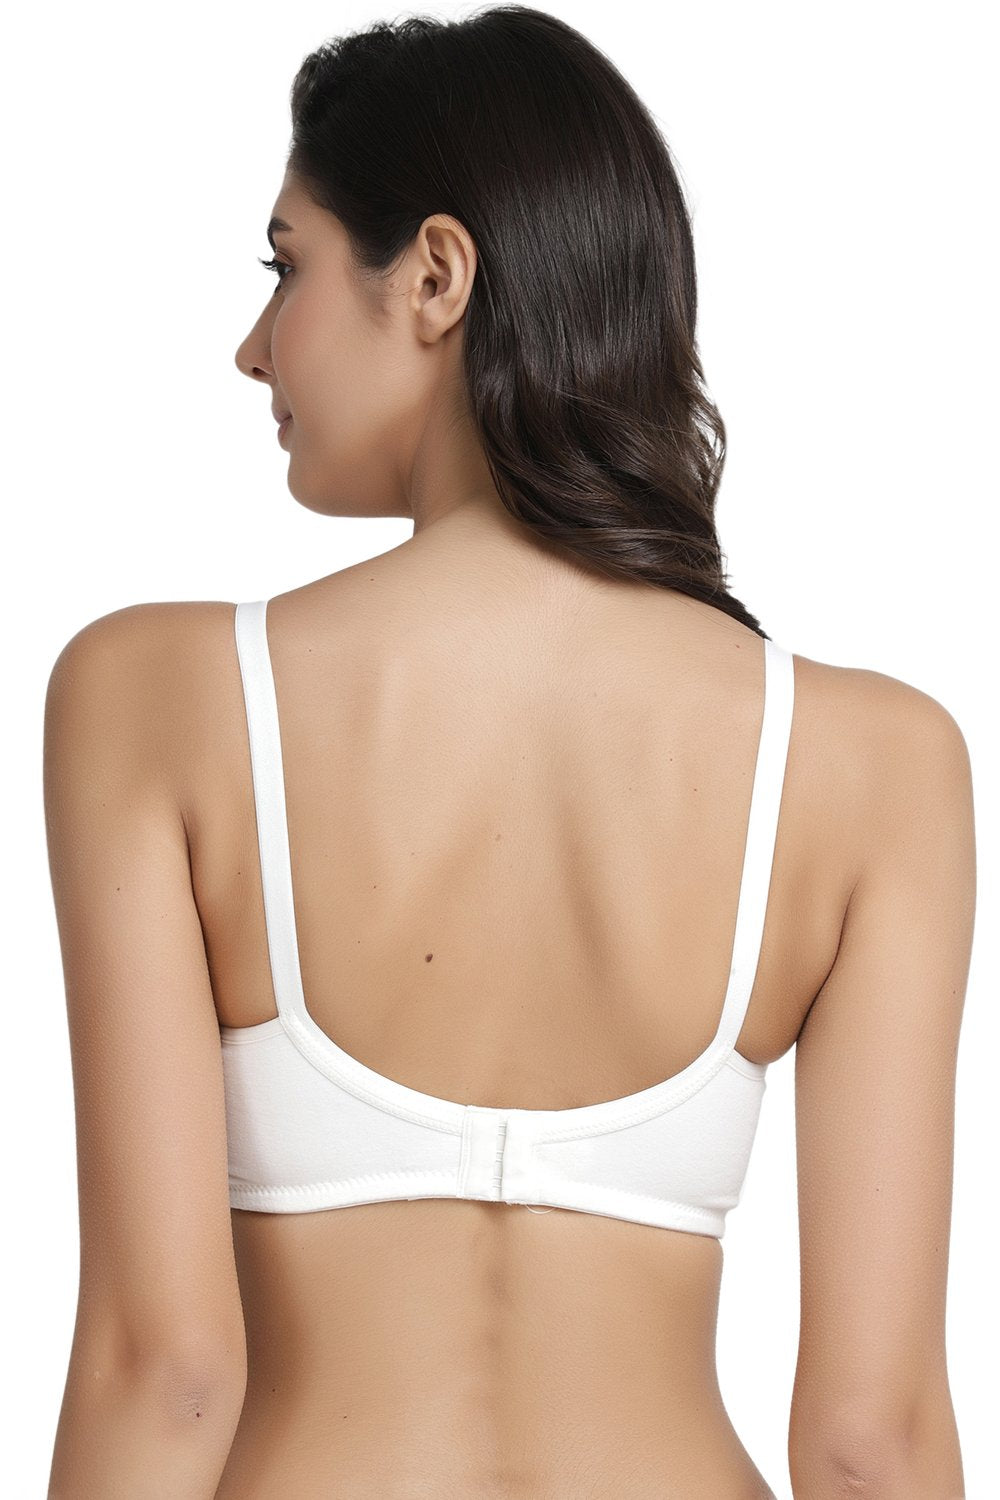 Buy Online Organic Cotton Antimicrobial Soft Nursing Bra with